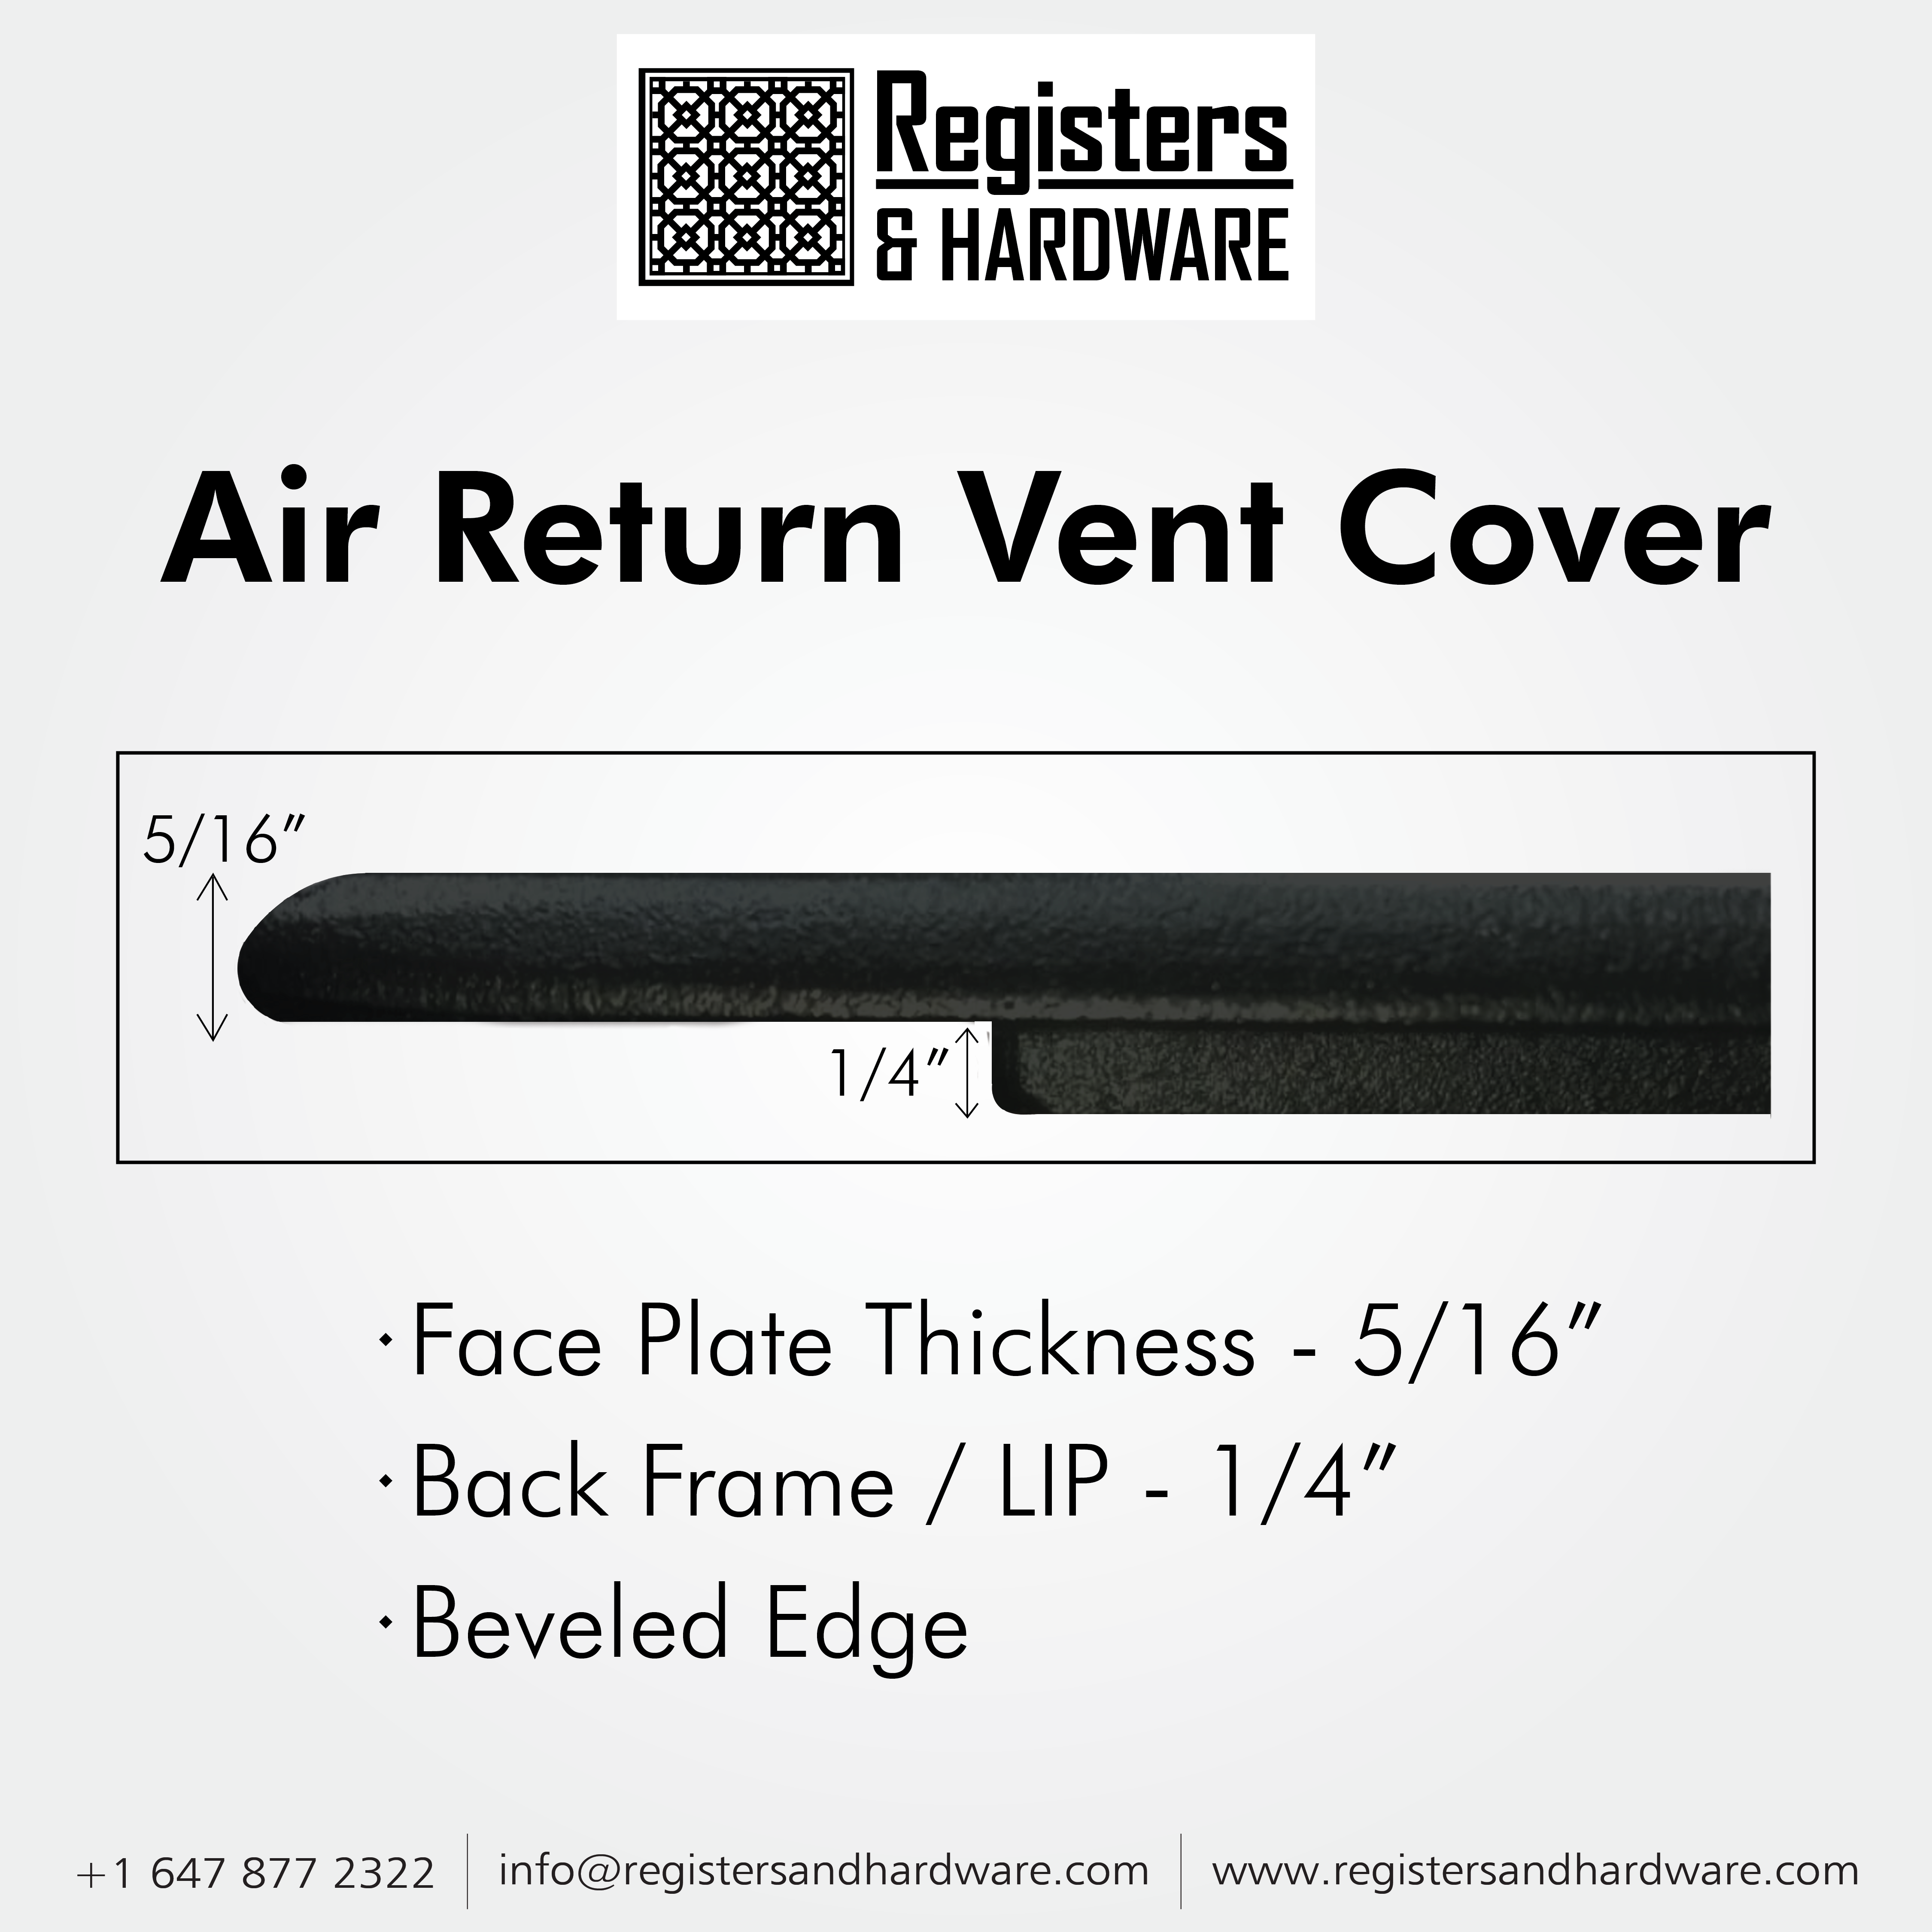 Achtek AIR RETURN 16"x26" Duct Opening (Overall Size 18"x28") | Heavy Cast Aluminum Air Grille HVAC Duct || Powder Coated